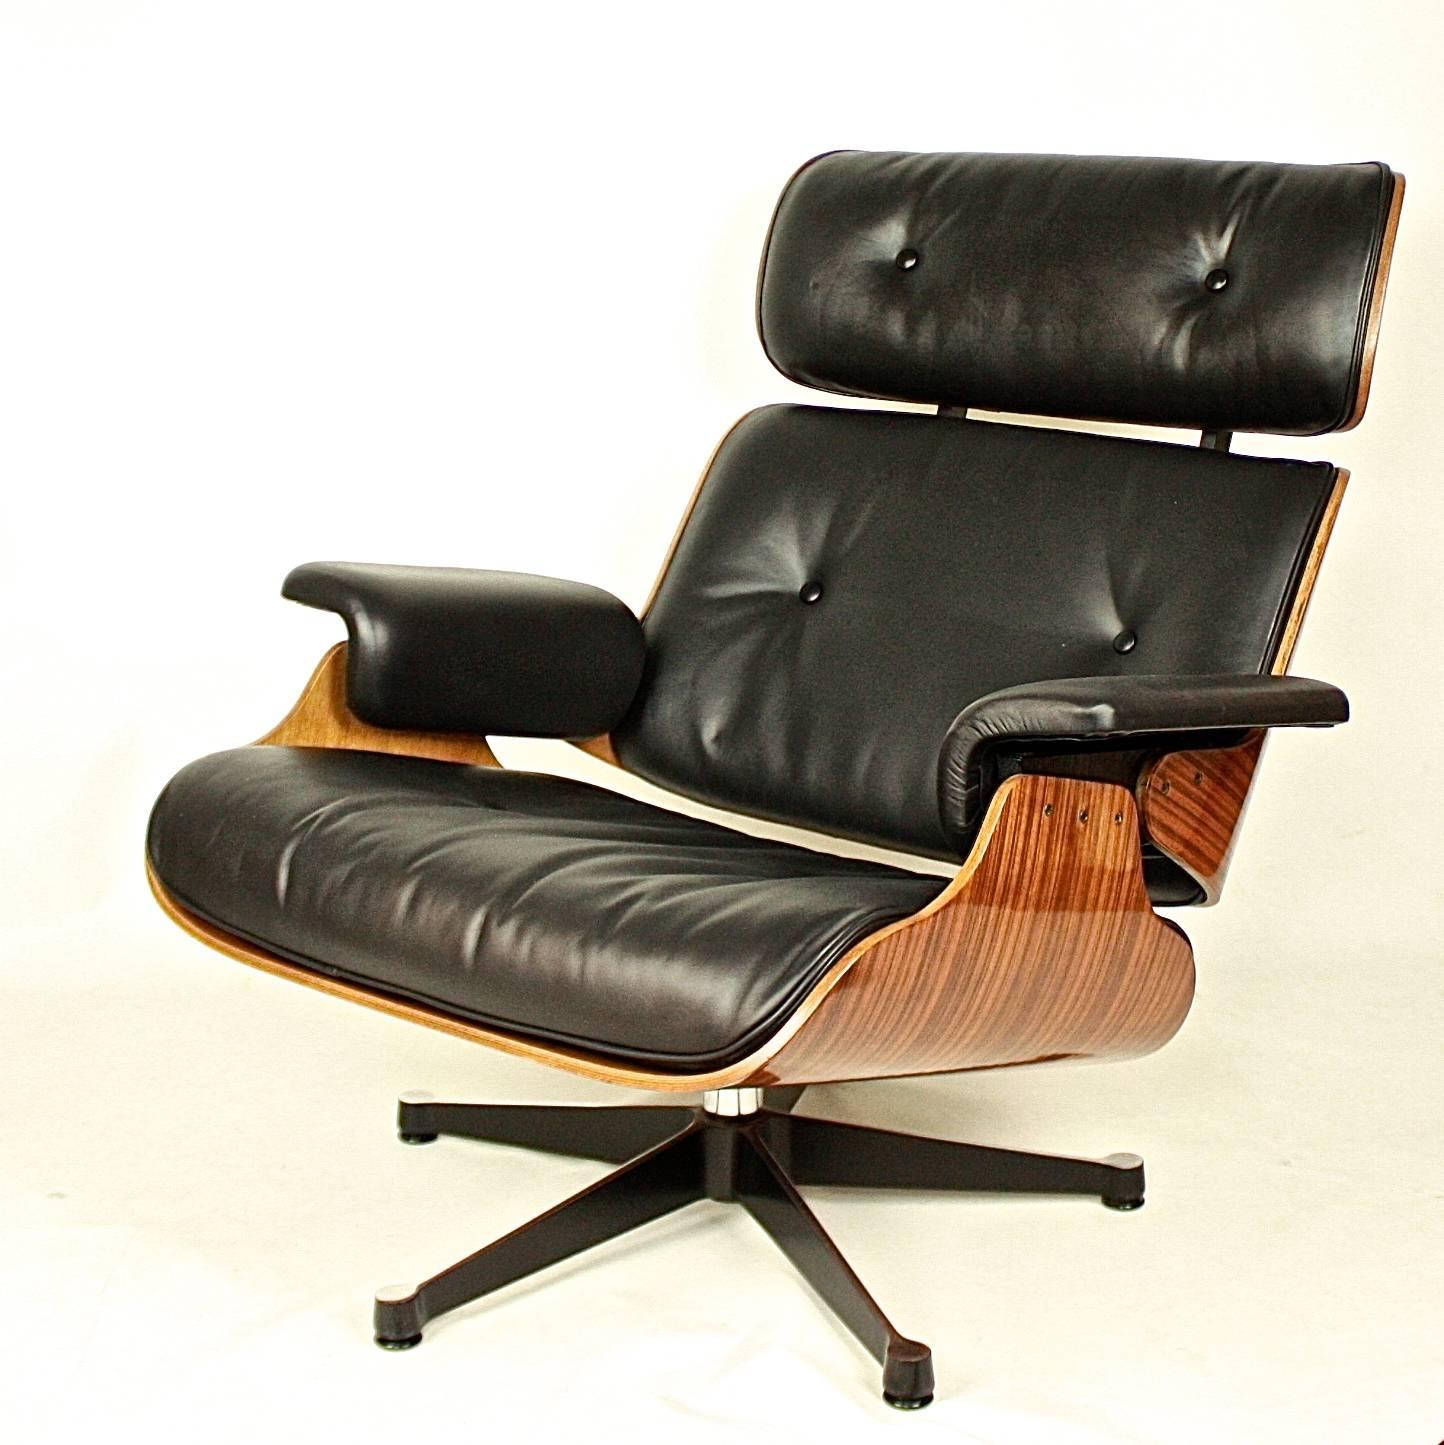 Pair of Ray and Charles Eames Style lounge chairs and one ottoman, after the famous mode designed 1955 by the Eamses and manufactured by Herman Miller. The rounded rectangular back and seat moulded in three sections and upholstered in black hide, on